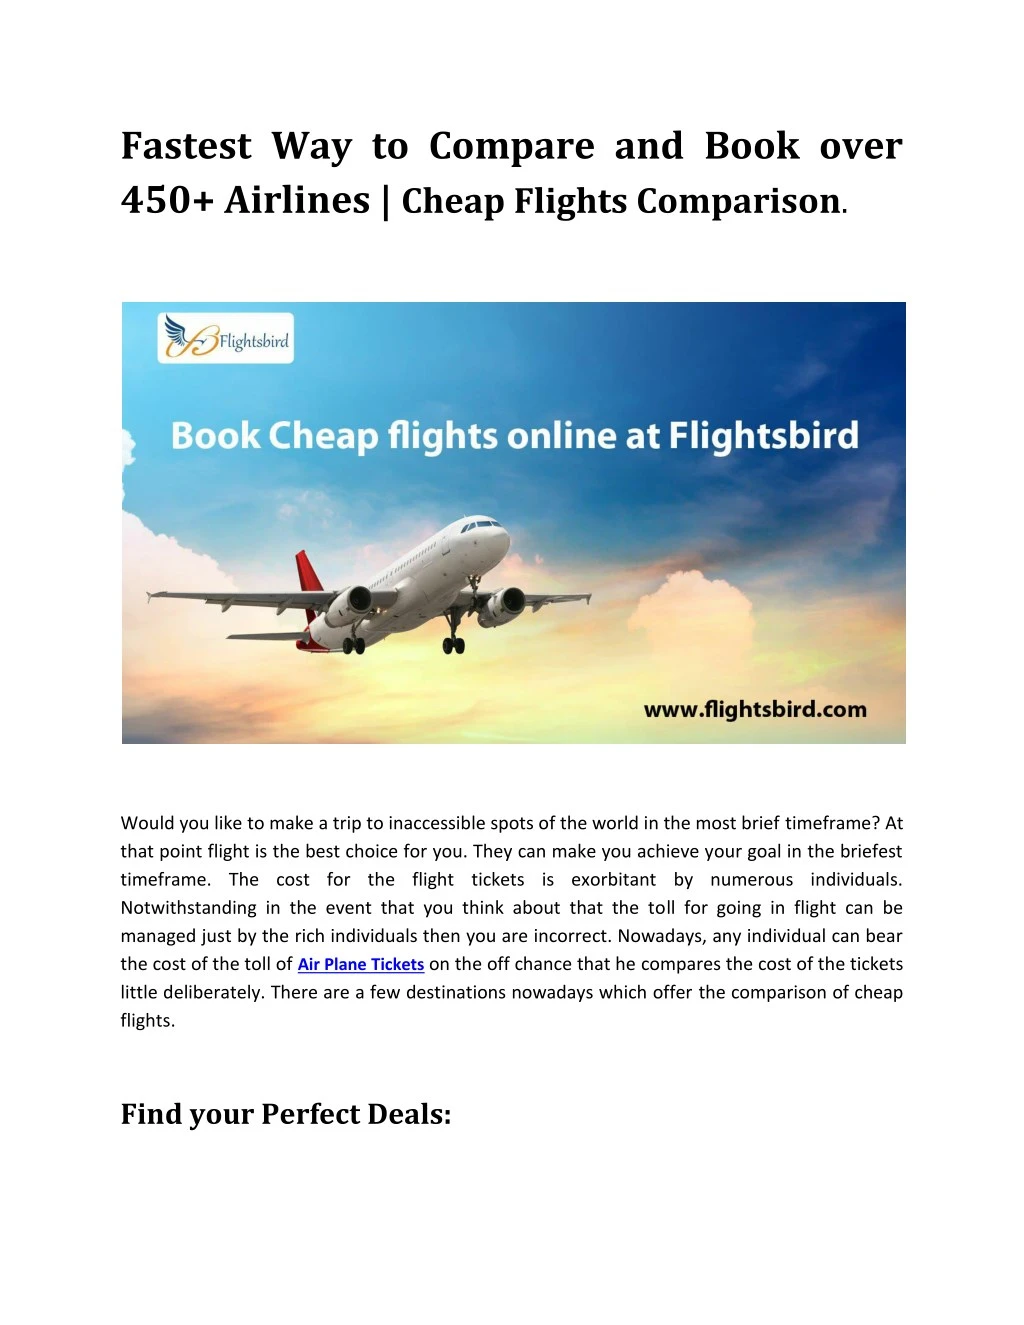 fastest way to compare and book over 450 airlines